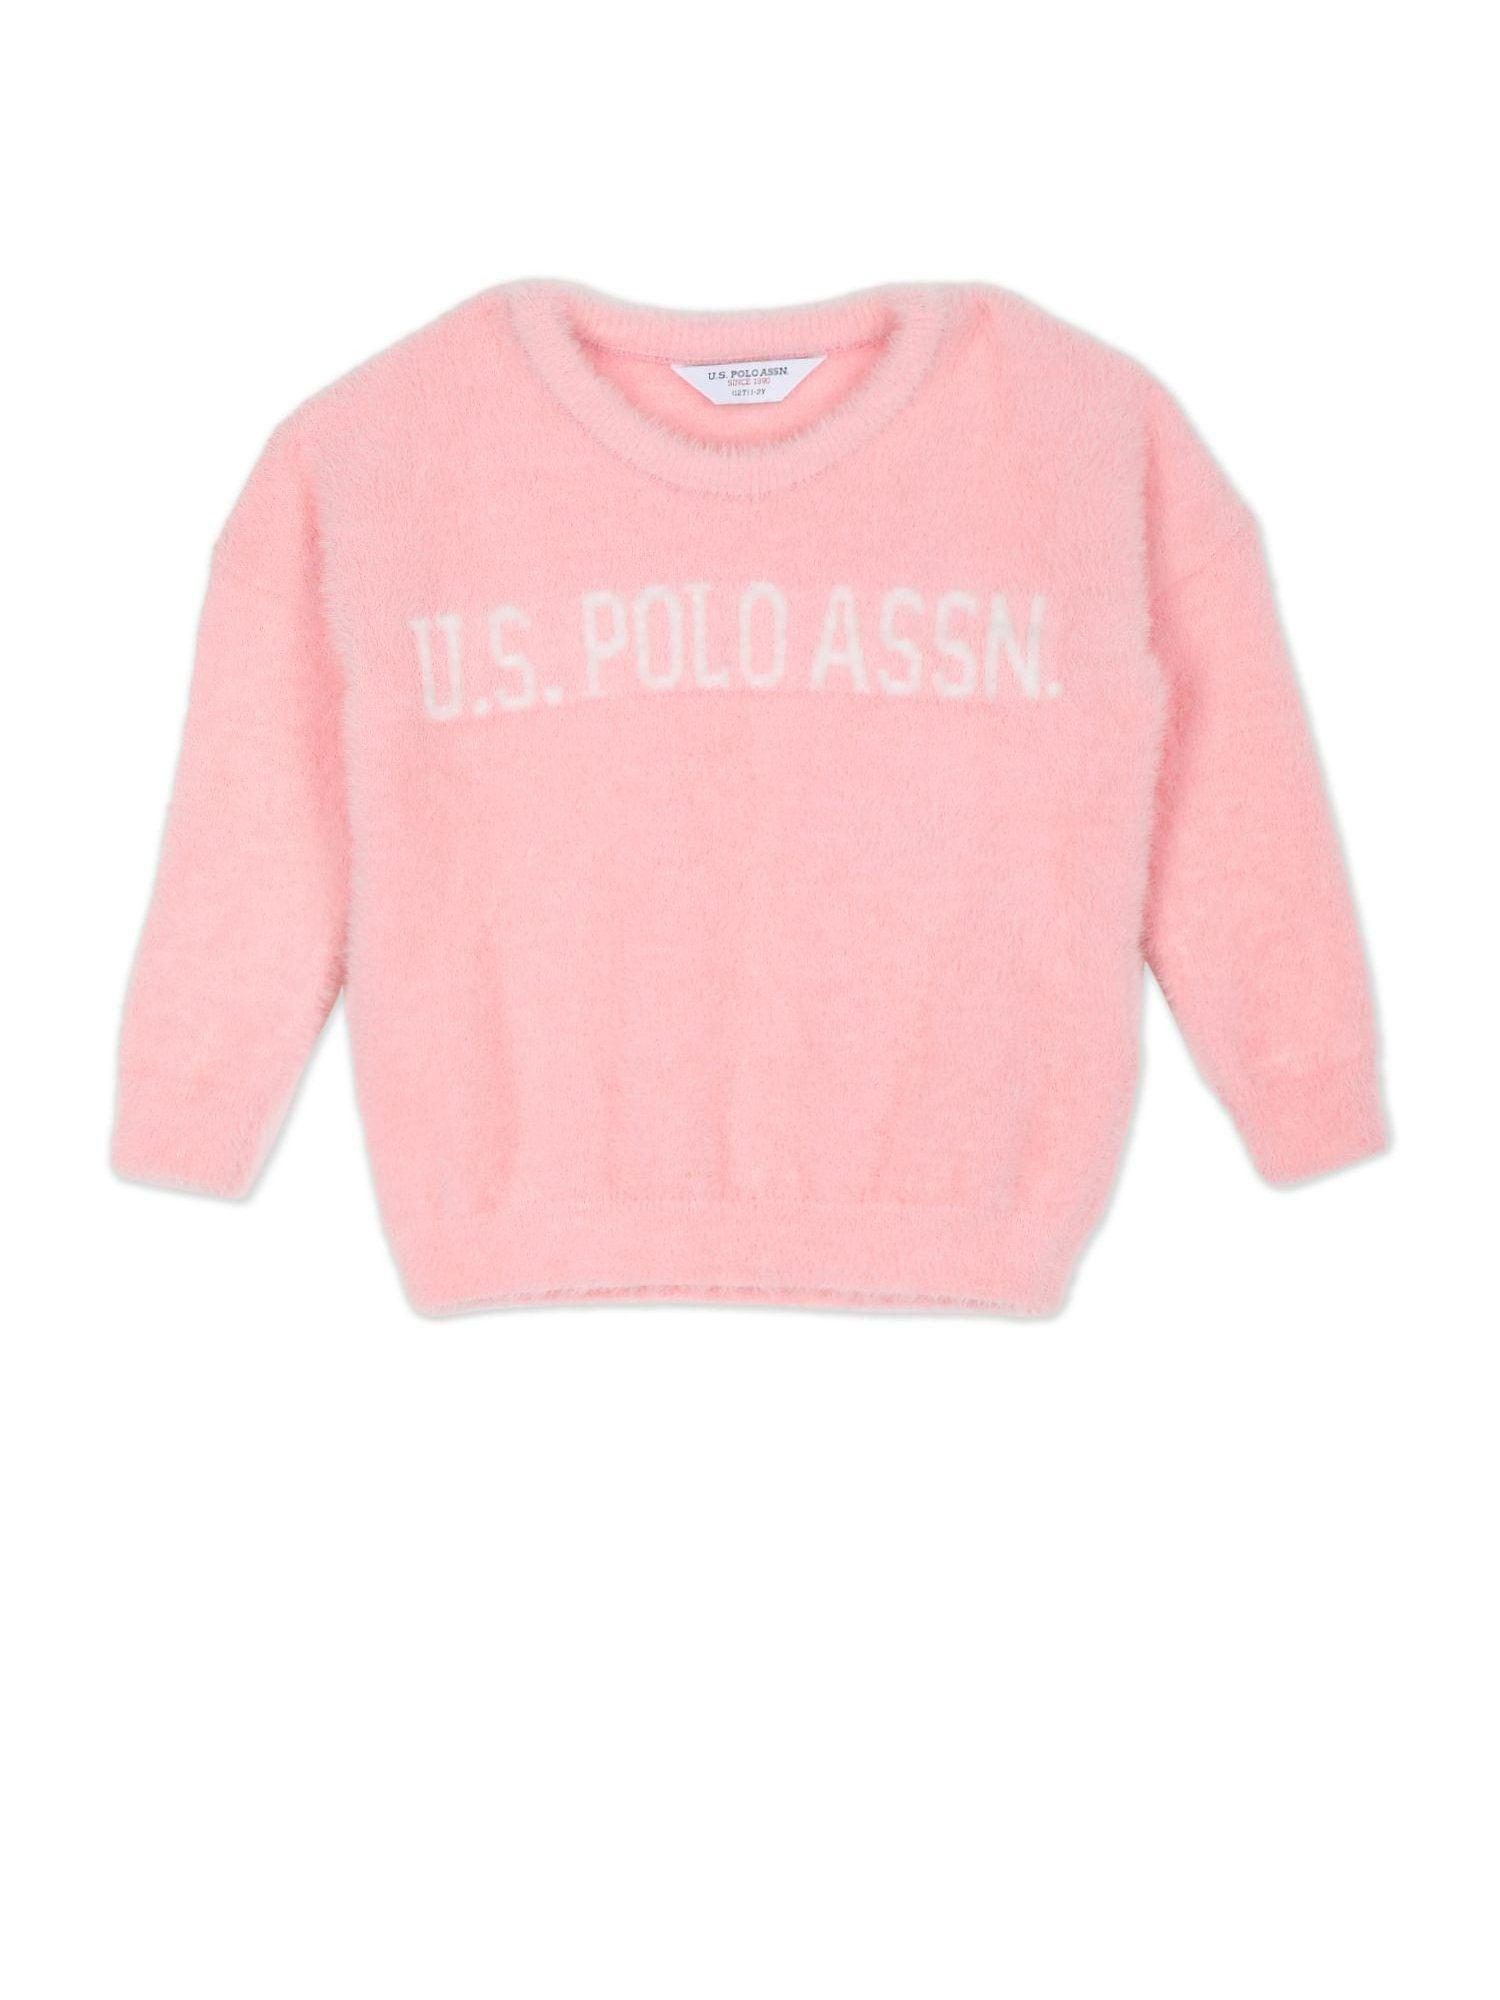 Girls Light Pink Patterned Knit Pullover Sweater